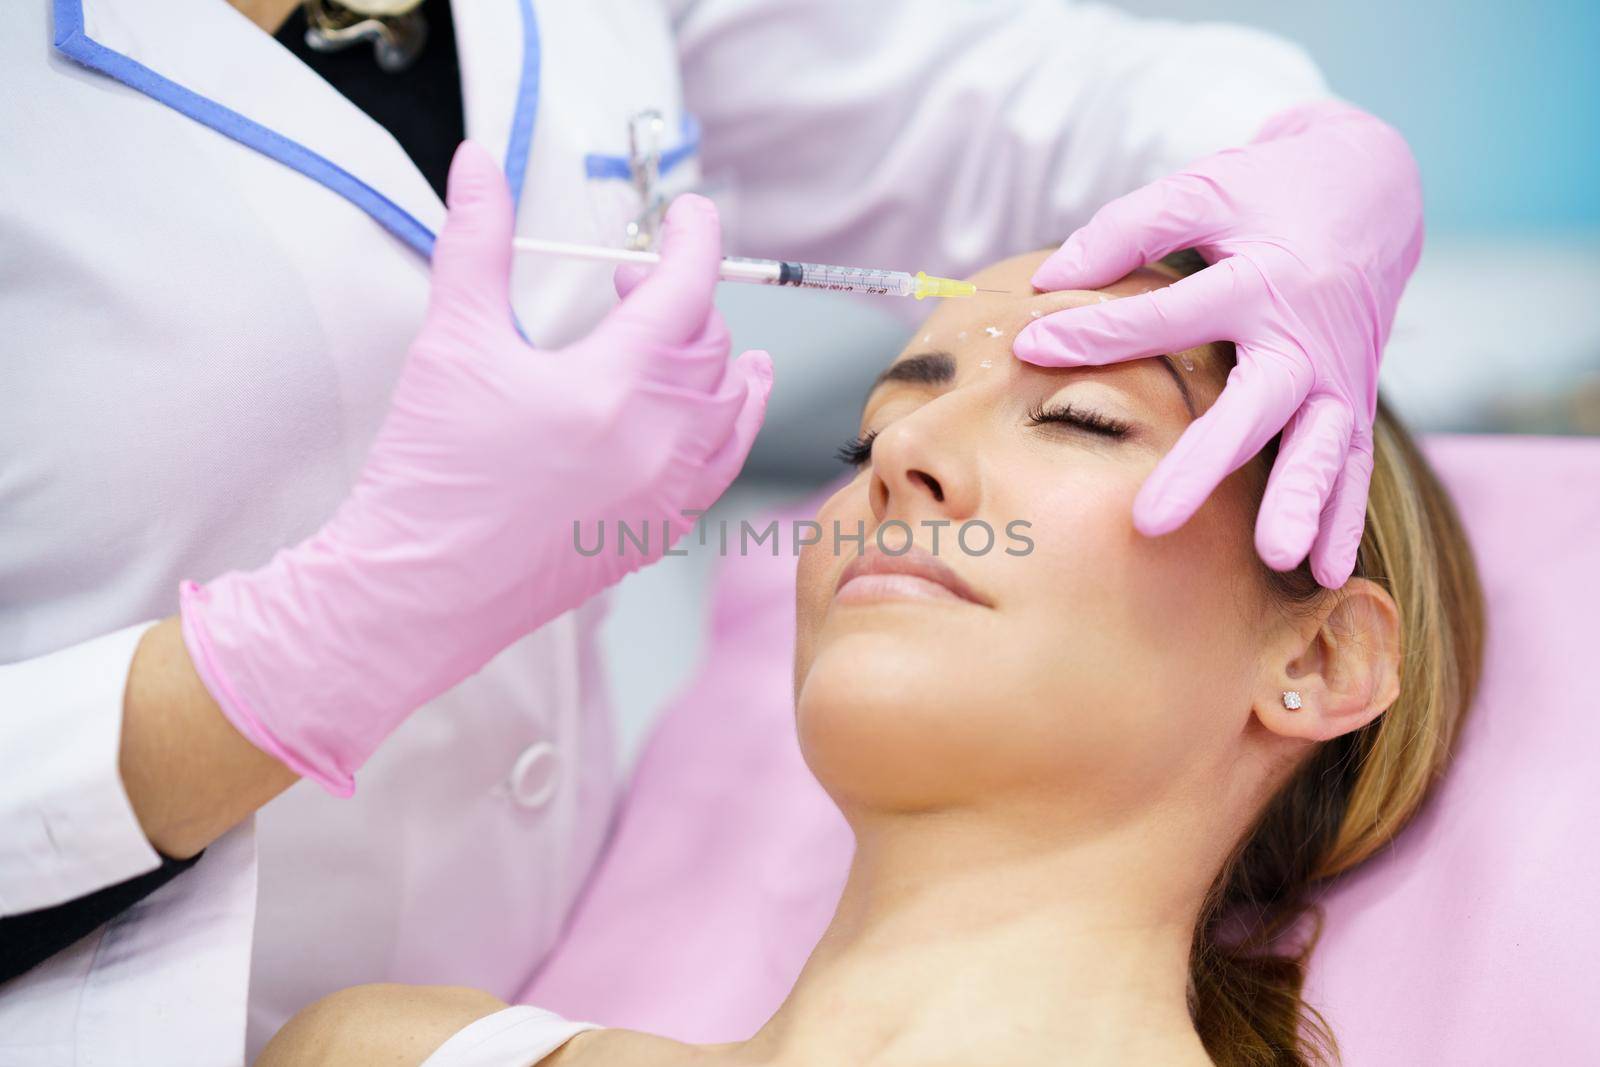 Aesthetic doctor injecting botox into the forehead of her middle-aged patient. Facial treatment done in a cosmetic surgery clinic.